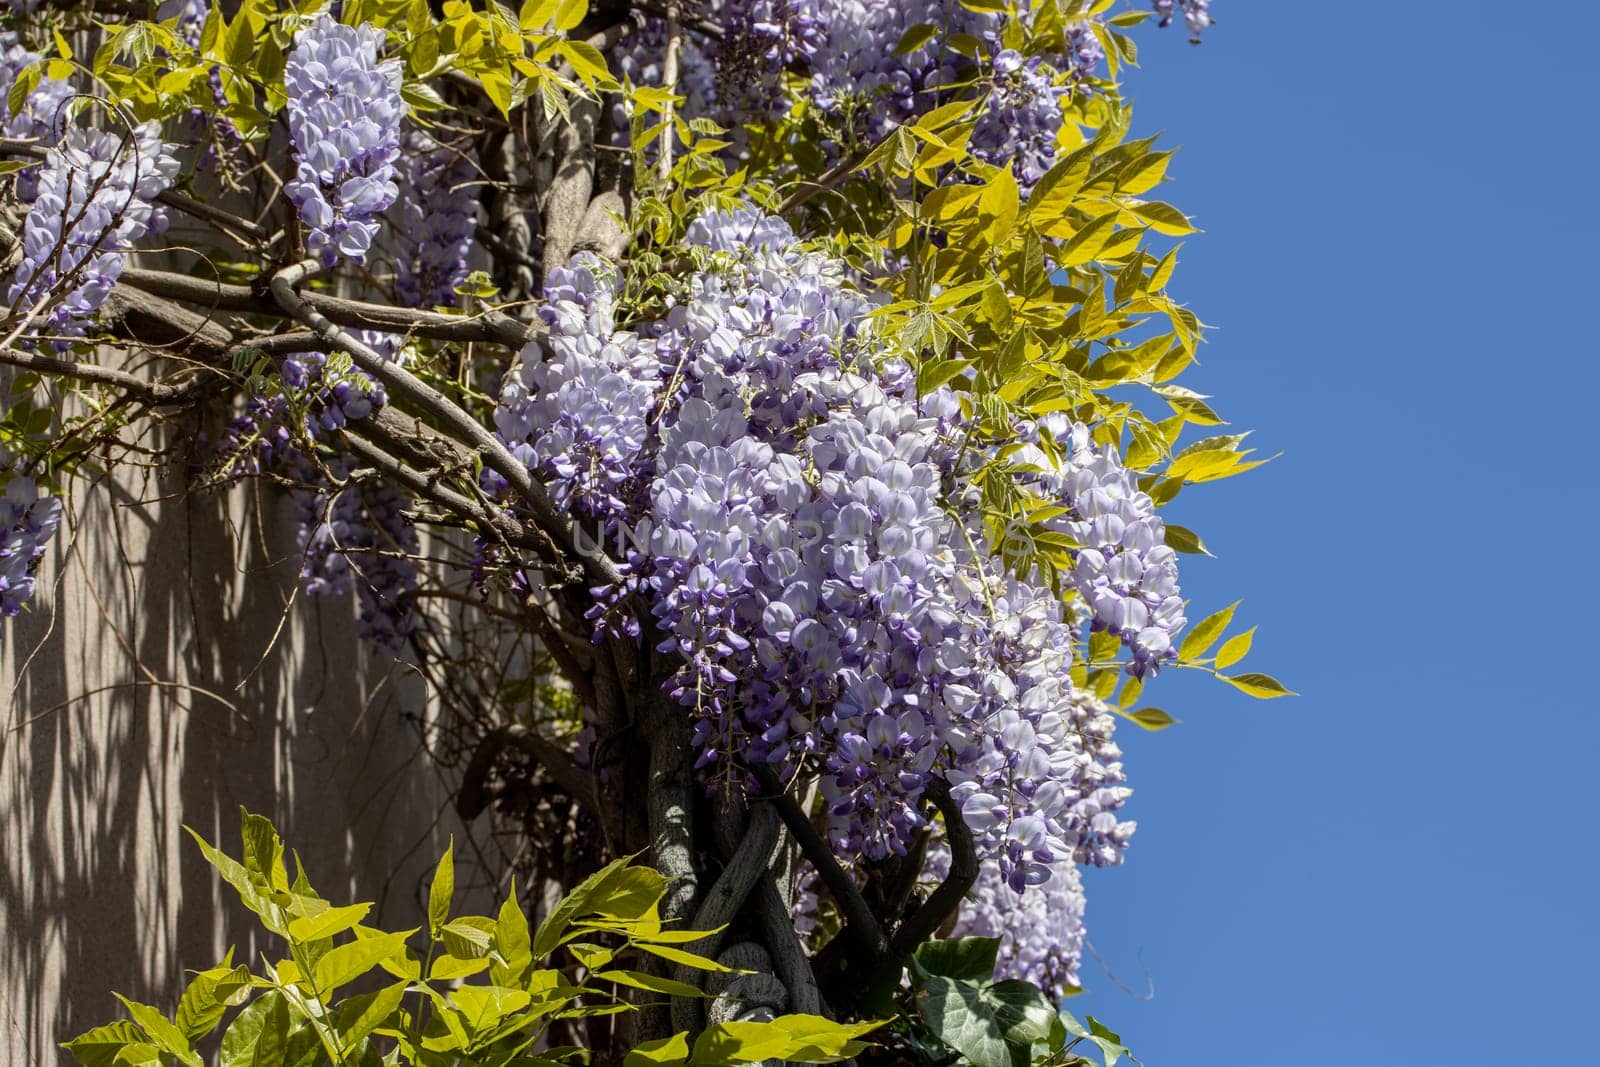 Flowering Wisteria plant on house wall concept photo. Countryside at spring season. by _Nataly_Nati_